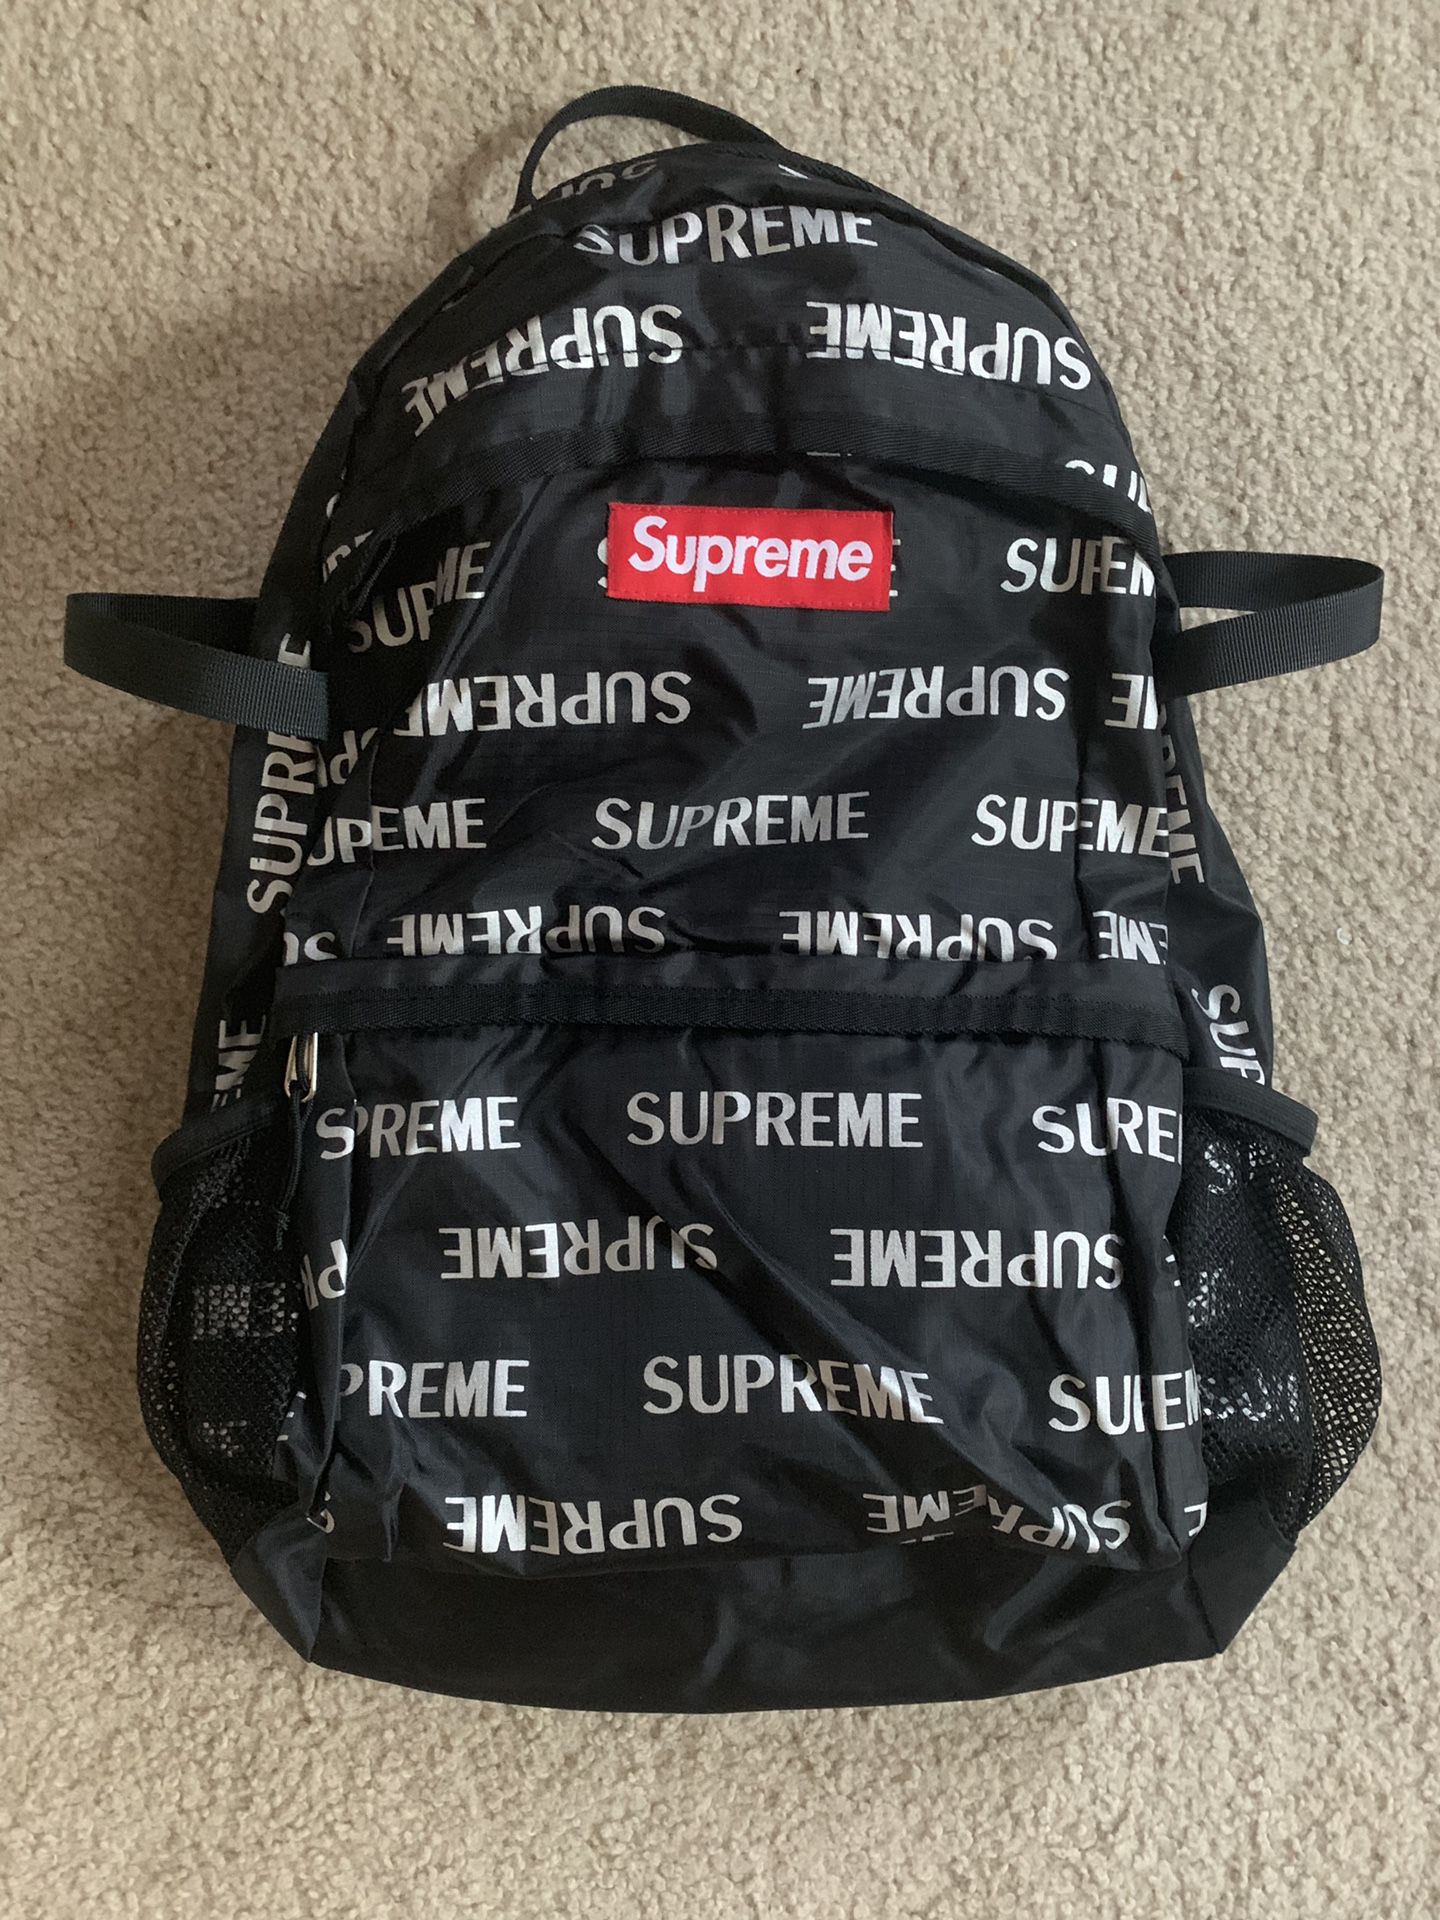 Supreme Reflective Backpack for Sale in Menifee, CA - OfferUp